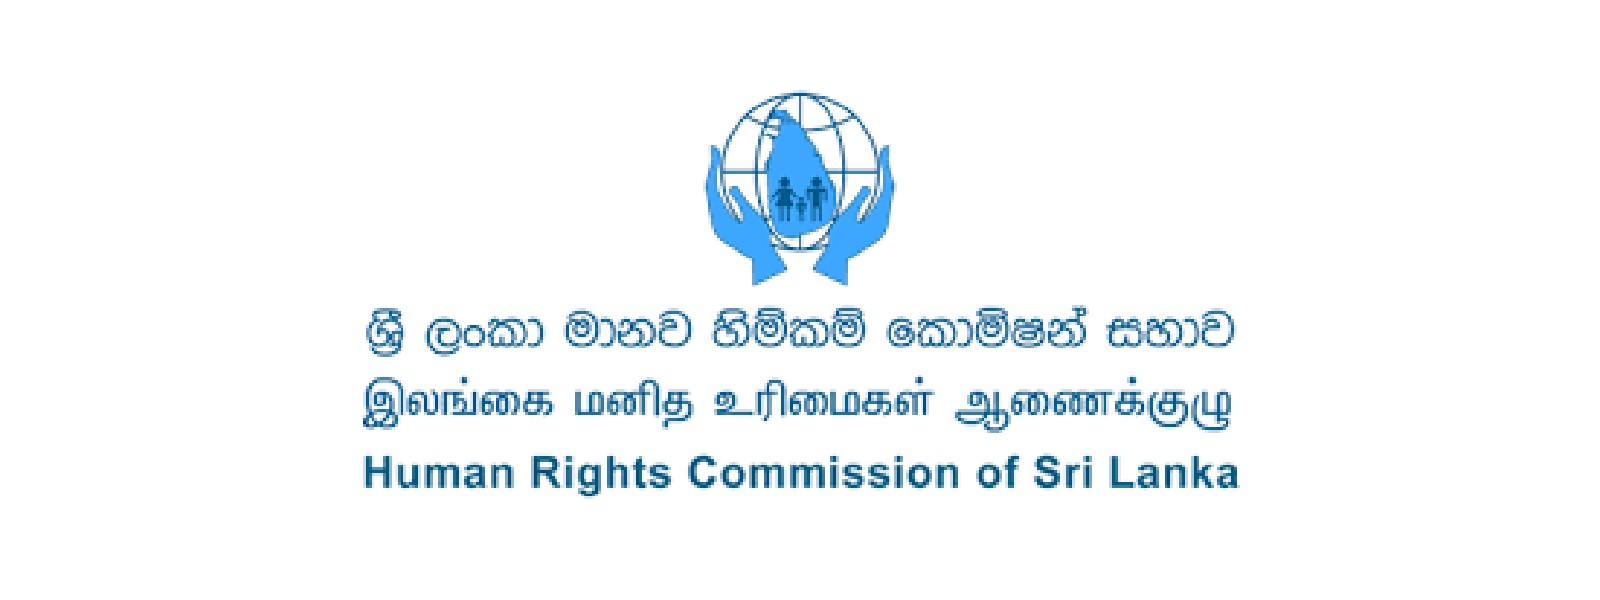 Prisons Chief, Officers summoned to HRCSL